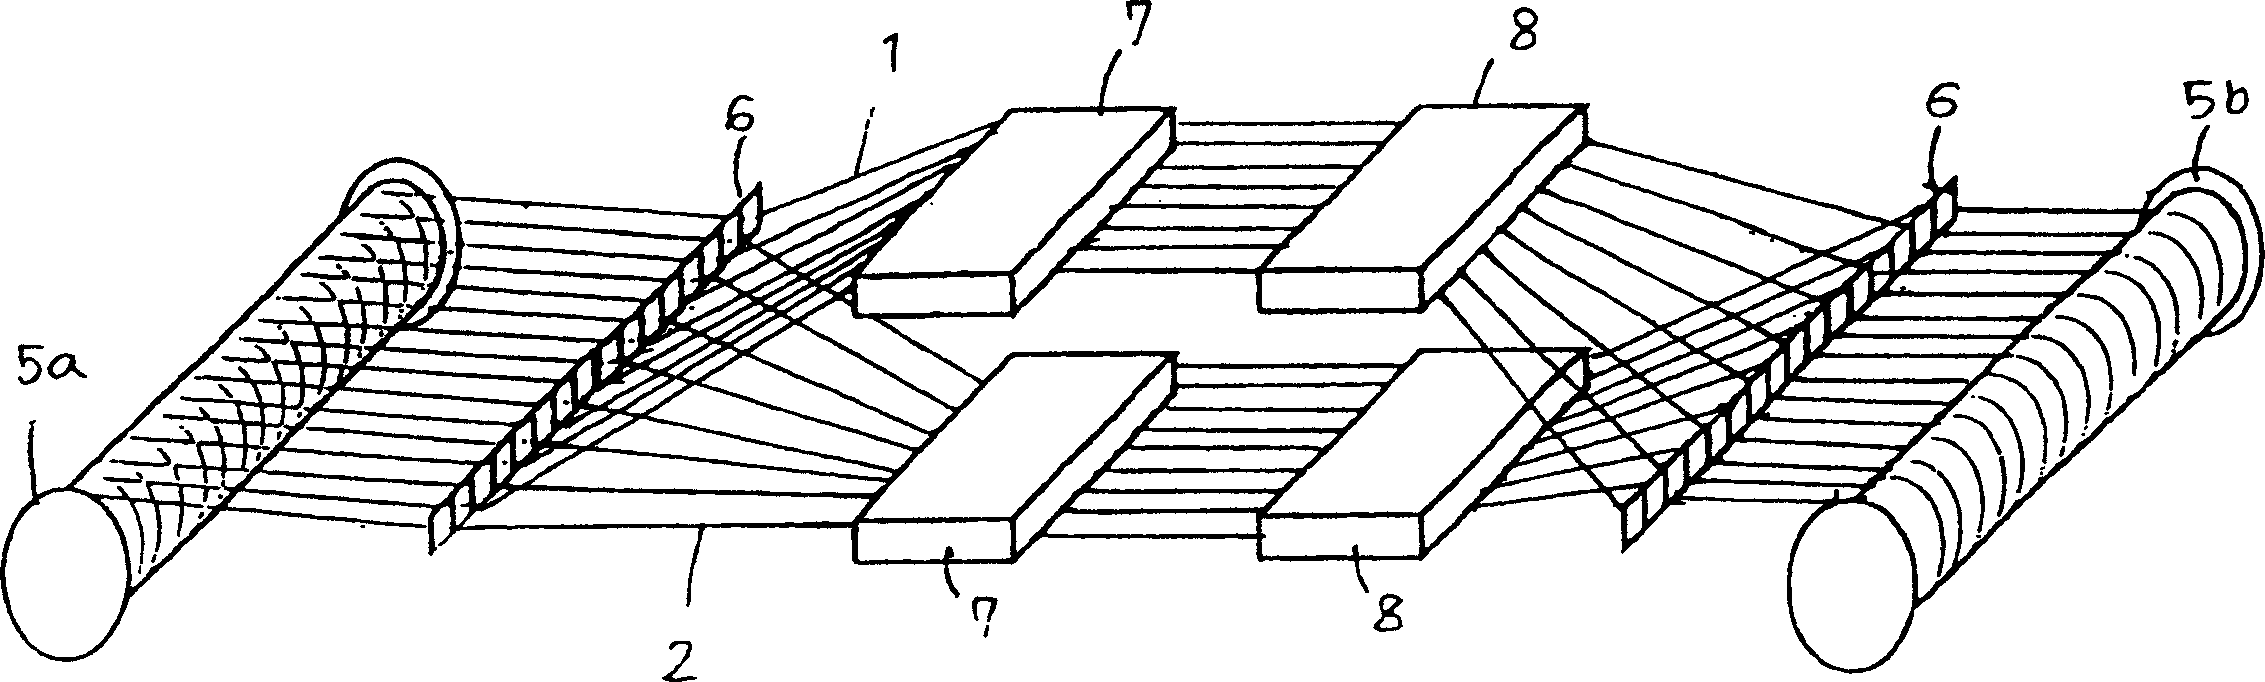 Dyeing processing method for textile